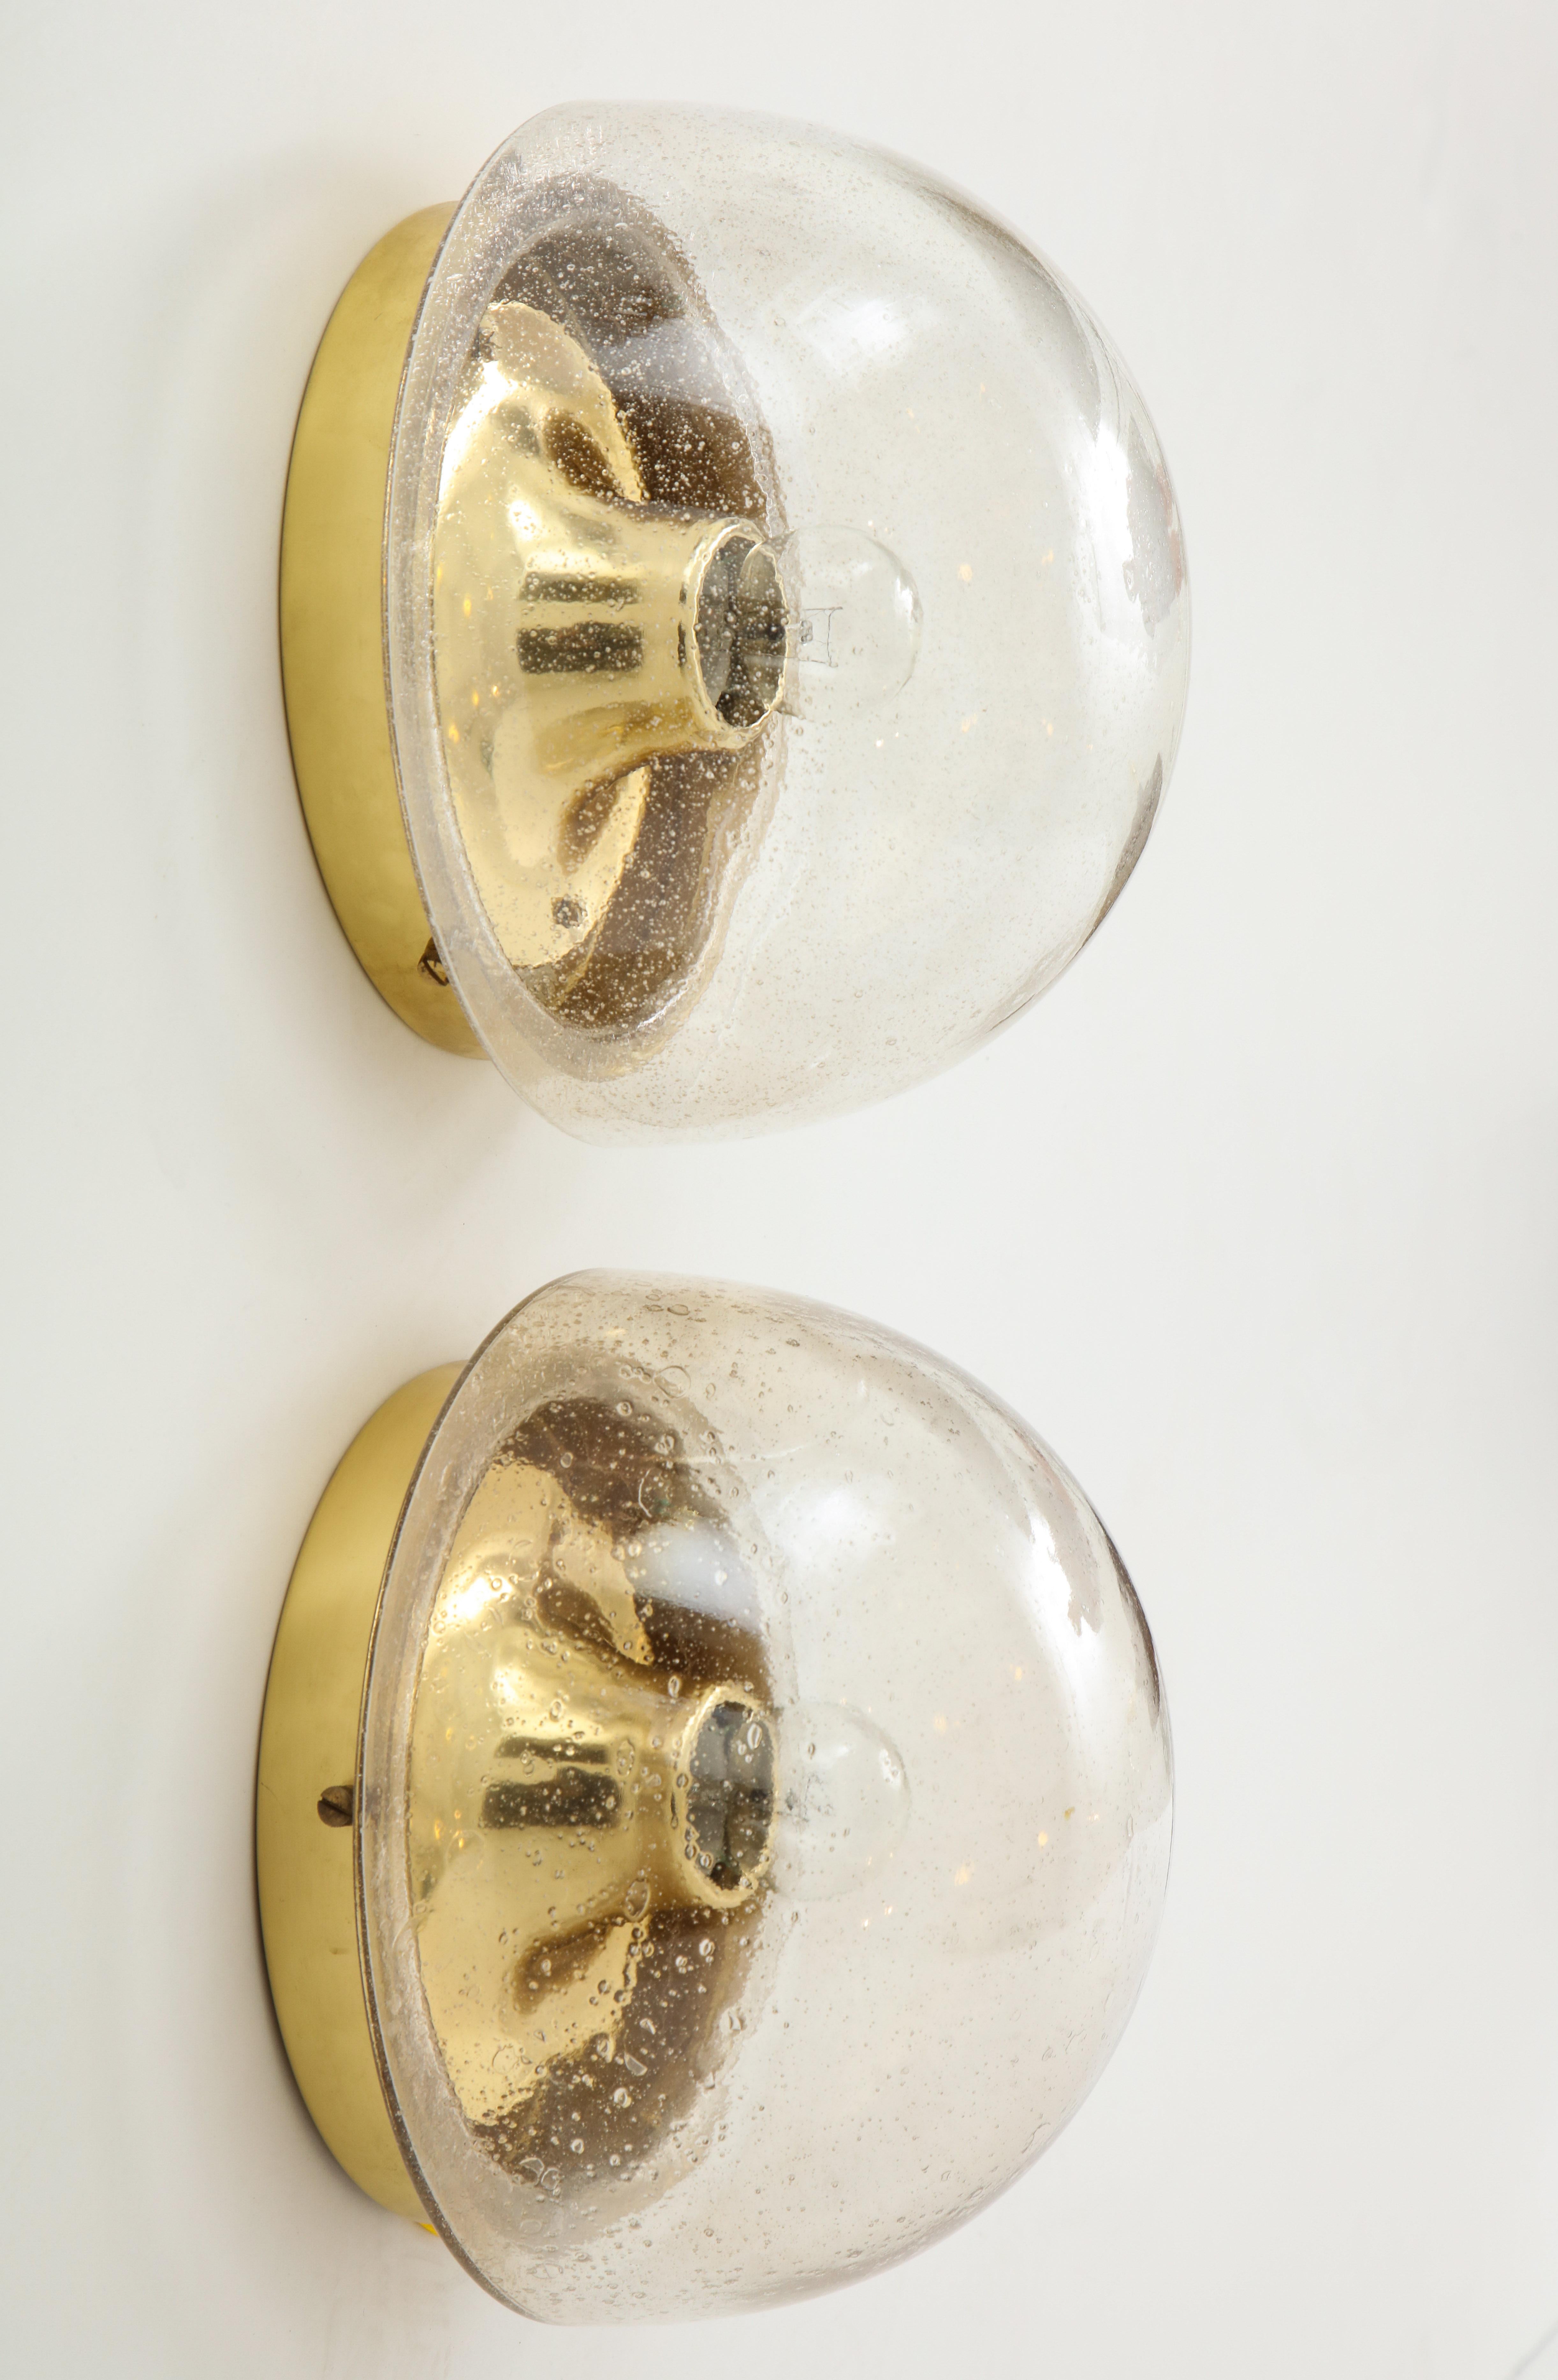 Pair of 1970s Murano glass dome sconces by Limburg.
The glass dome fits on to a brass backplate with a single
light source which has been newly rewired for the US.